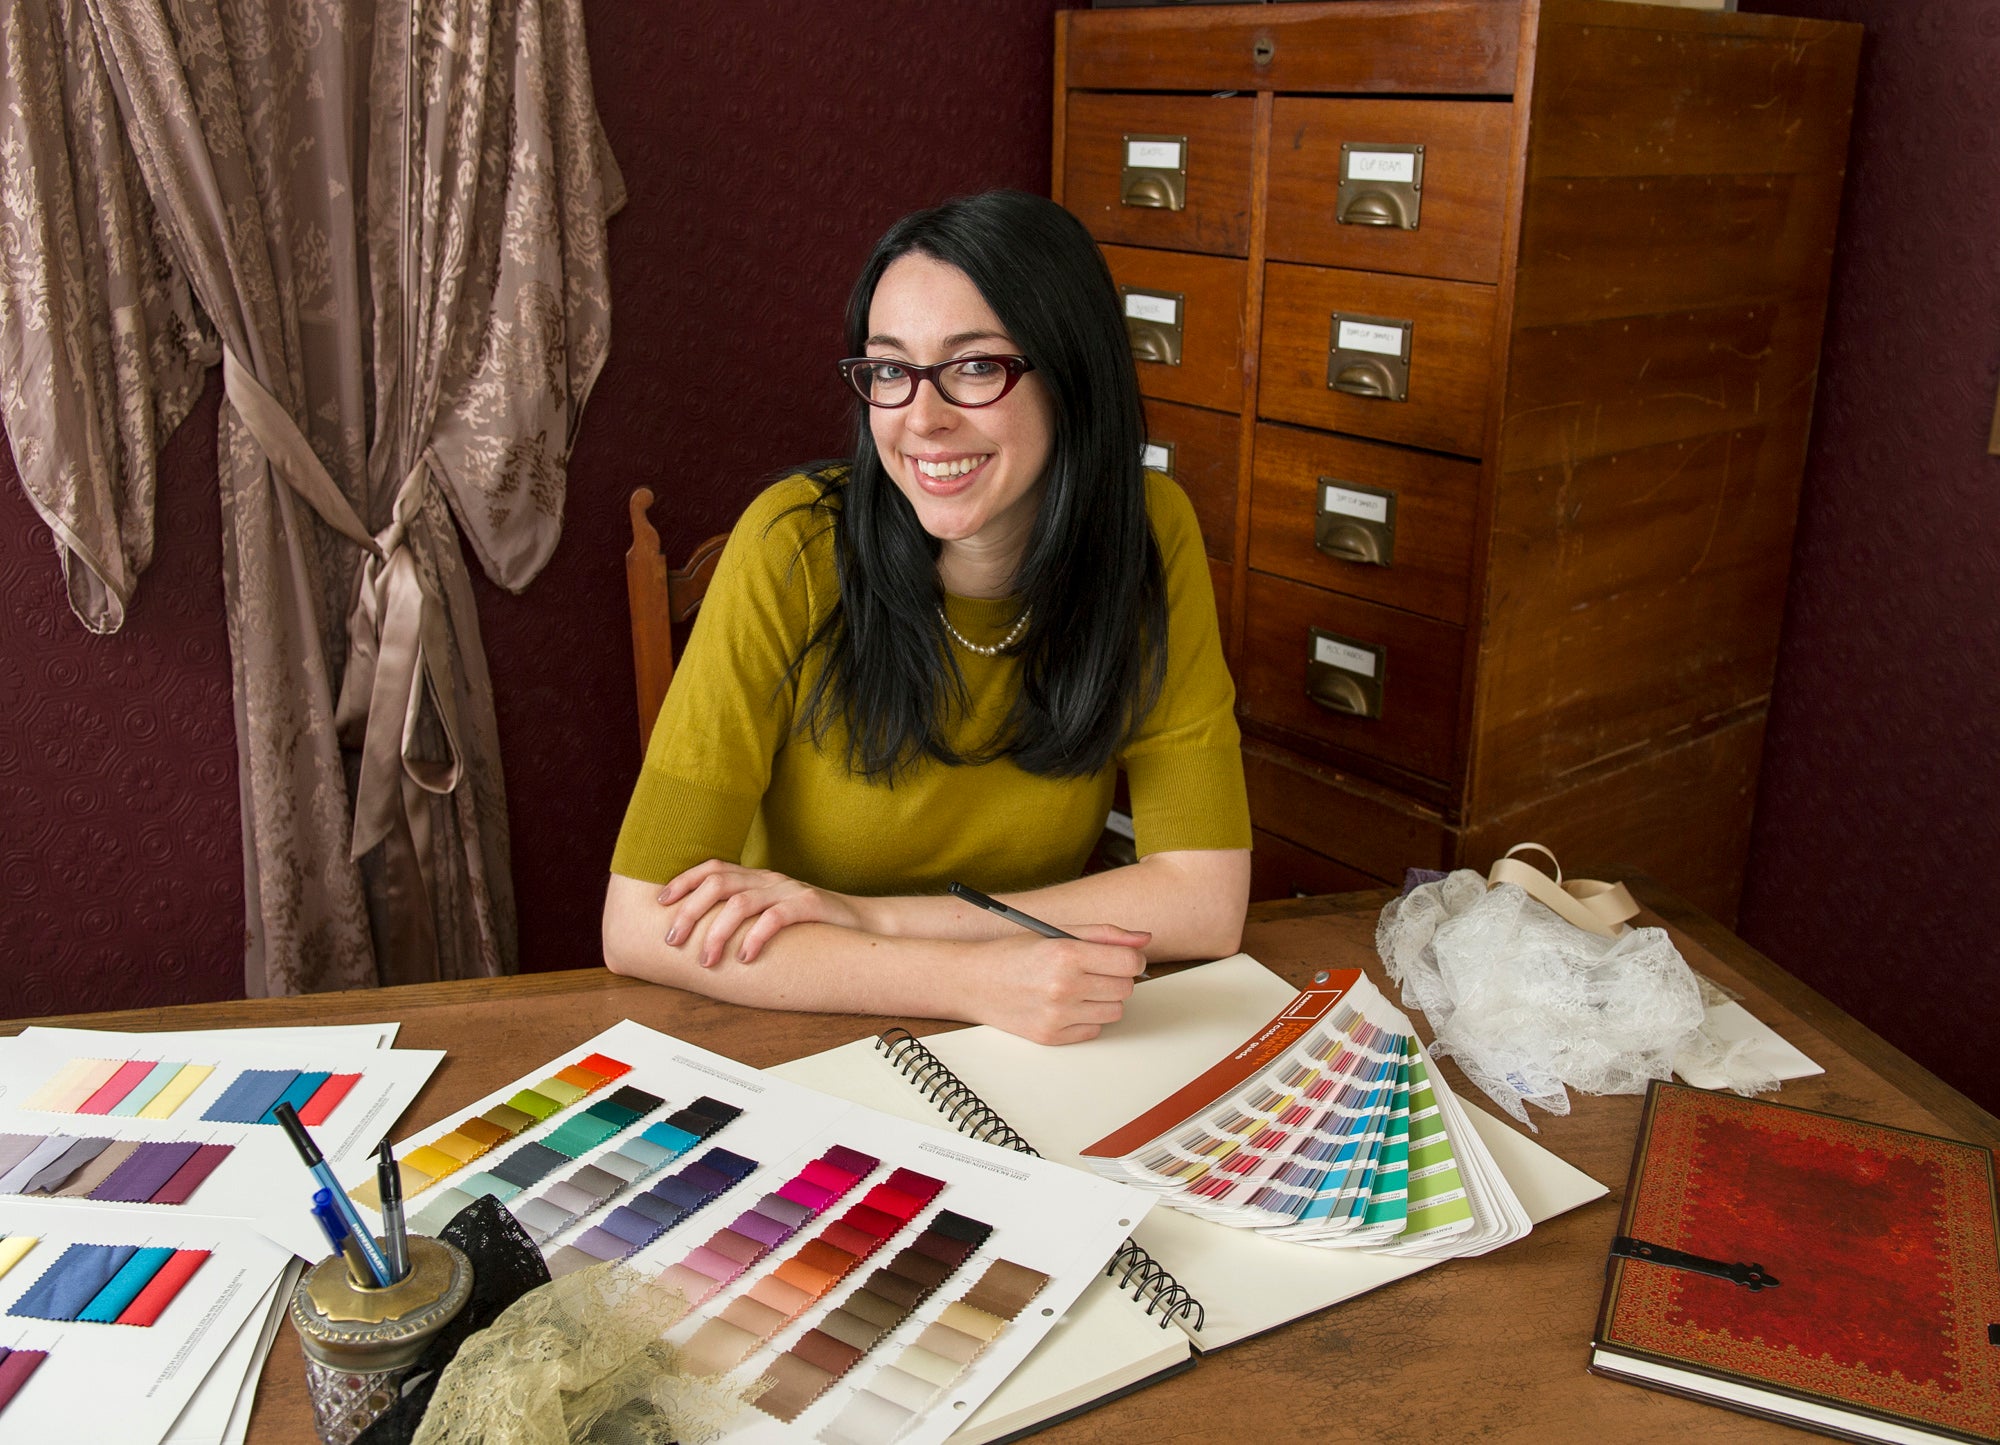 Brand founder with silk swatches and design materials